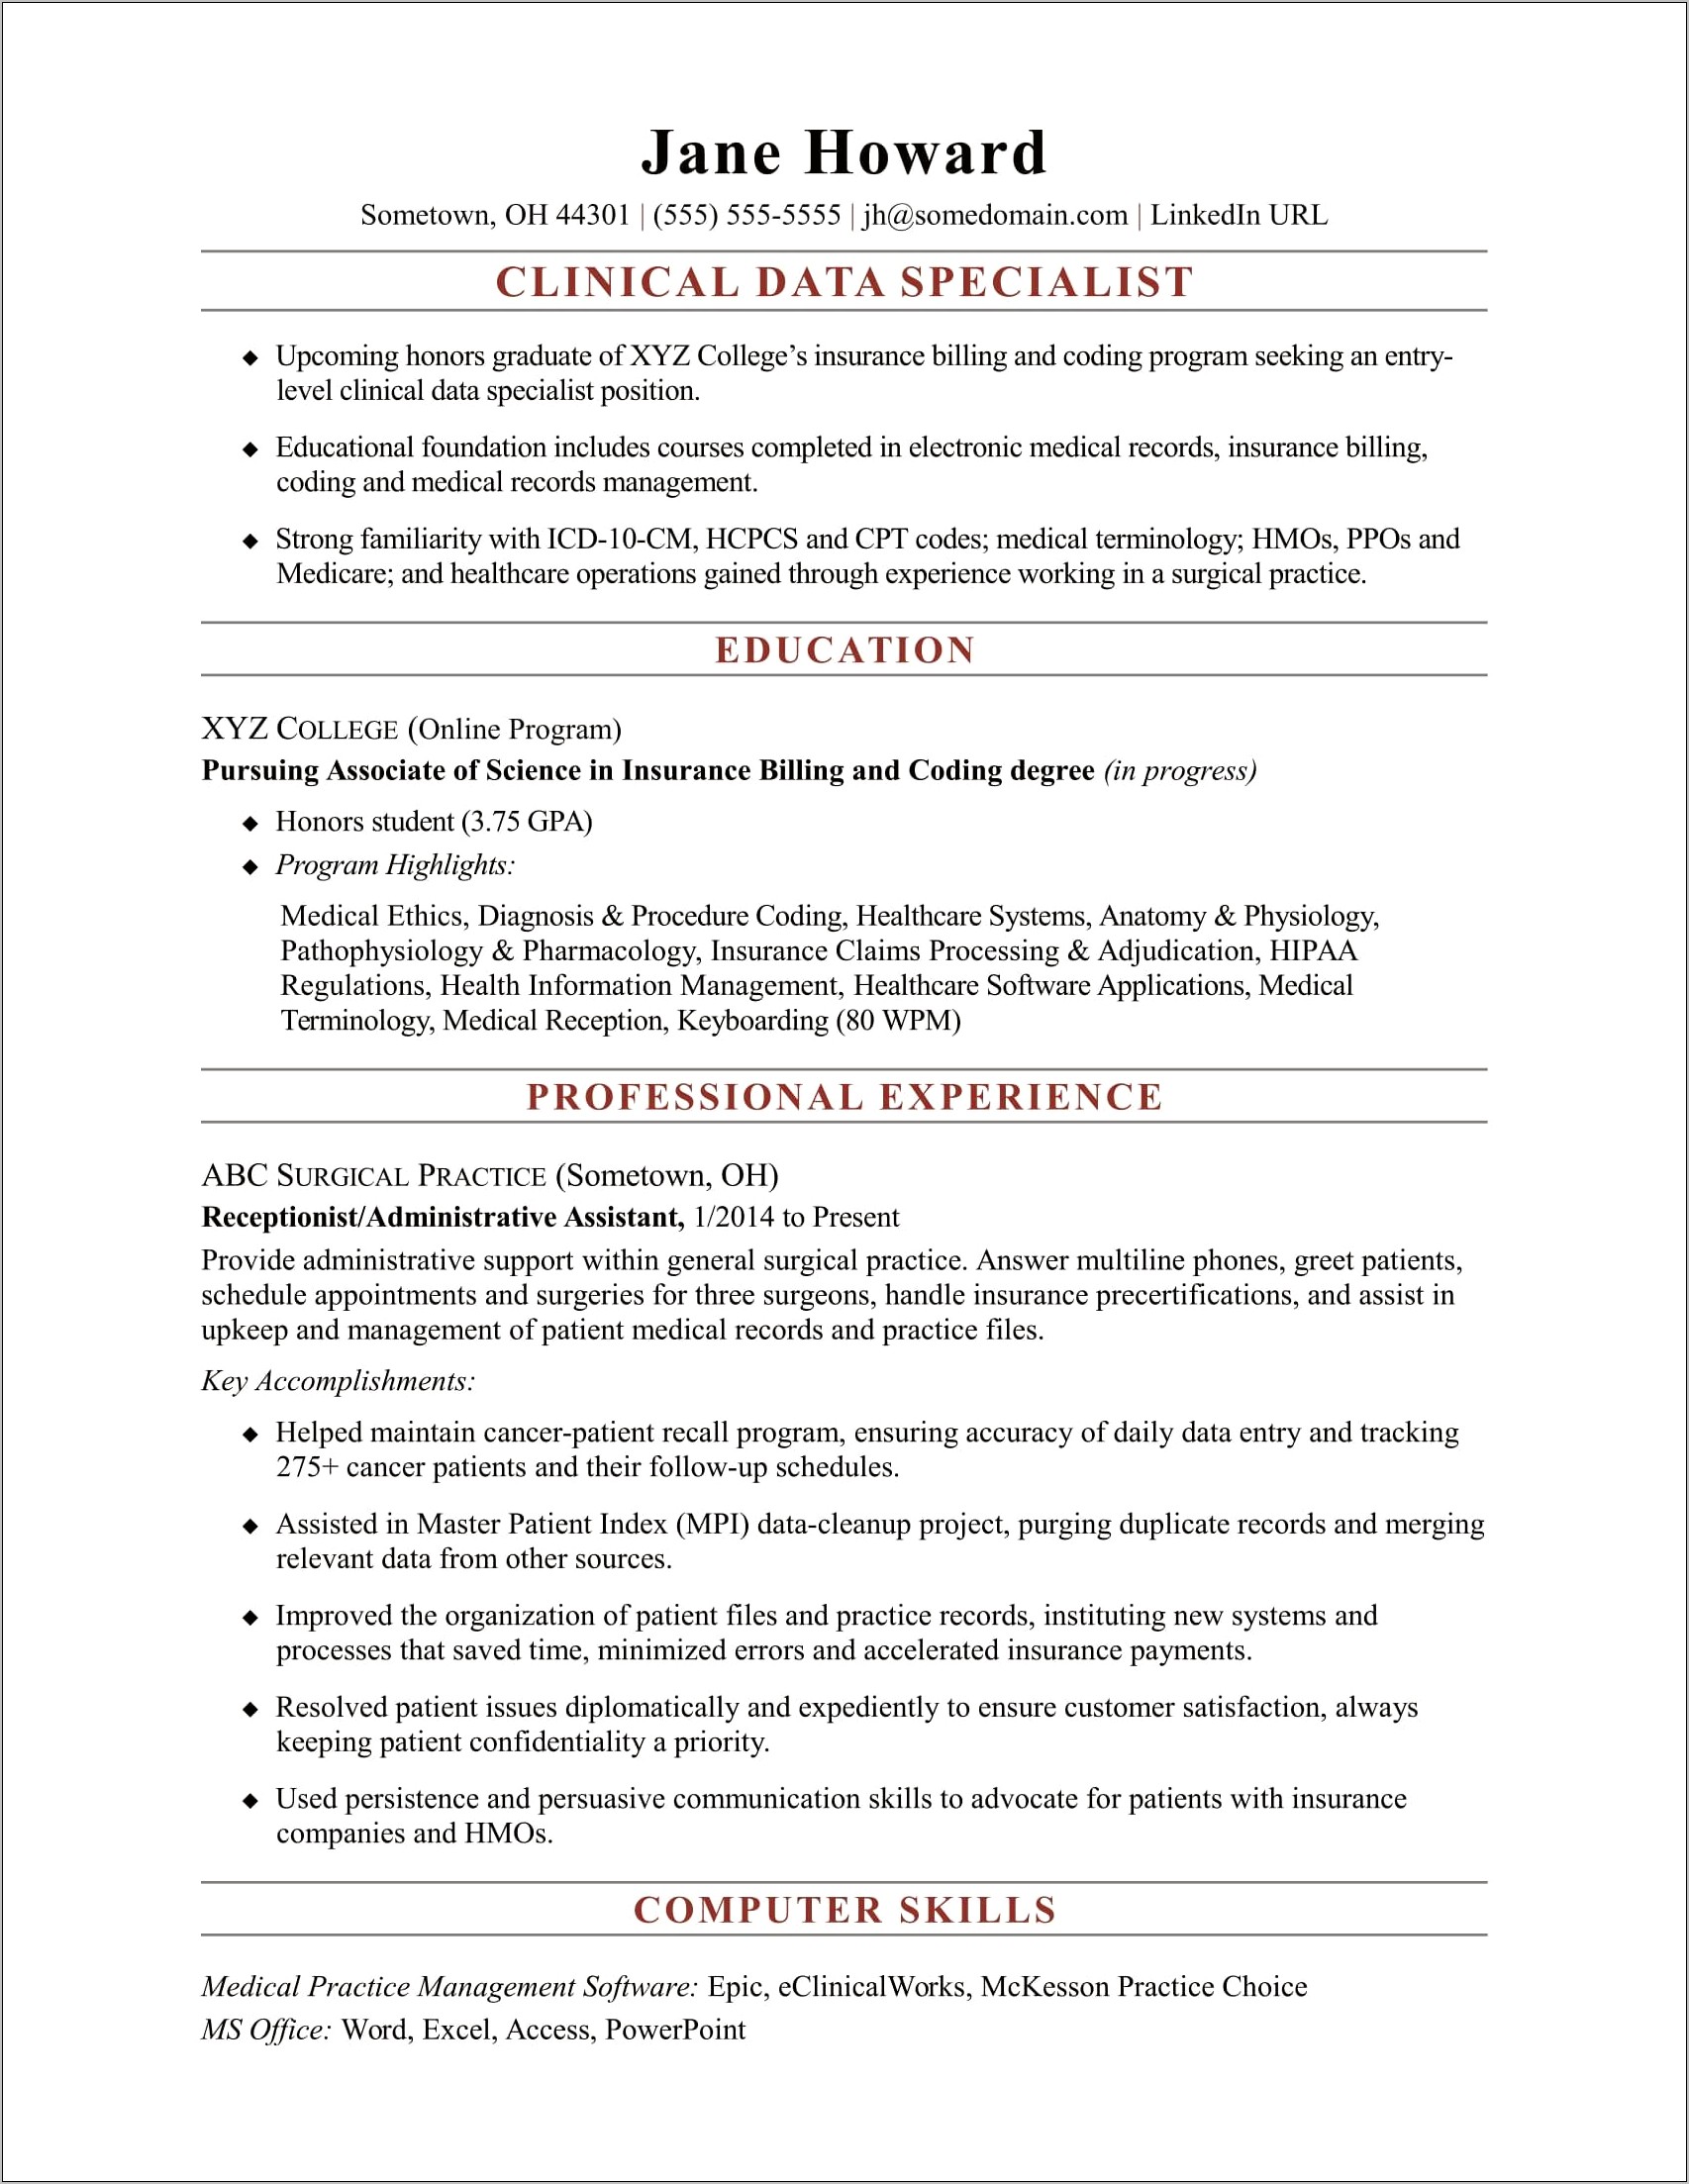 Can I Put Confidential Information On Resume